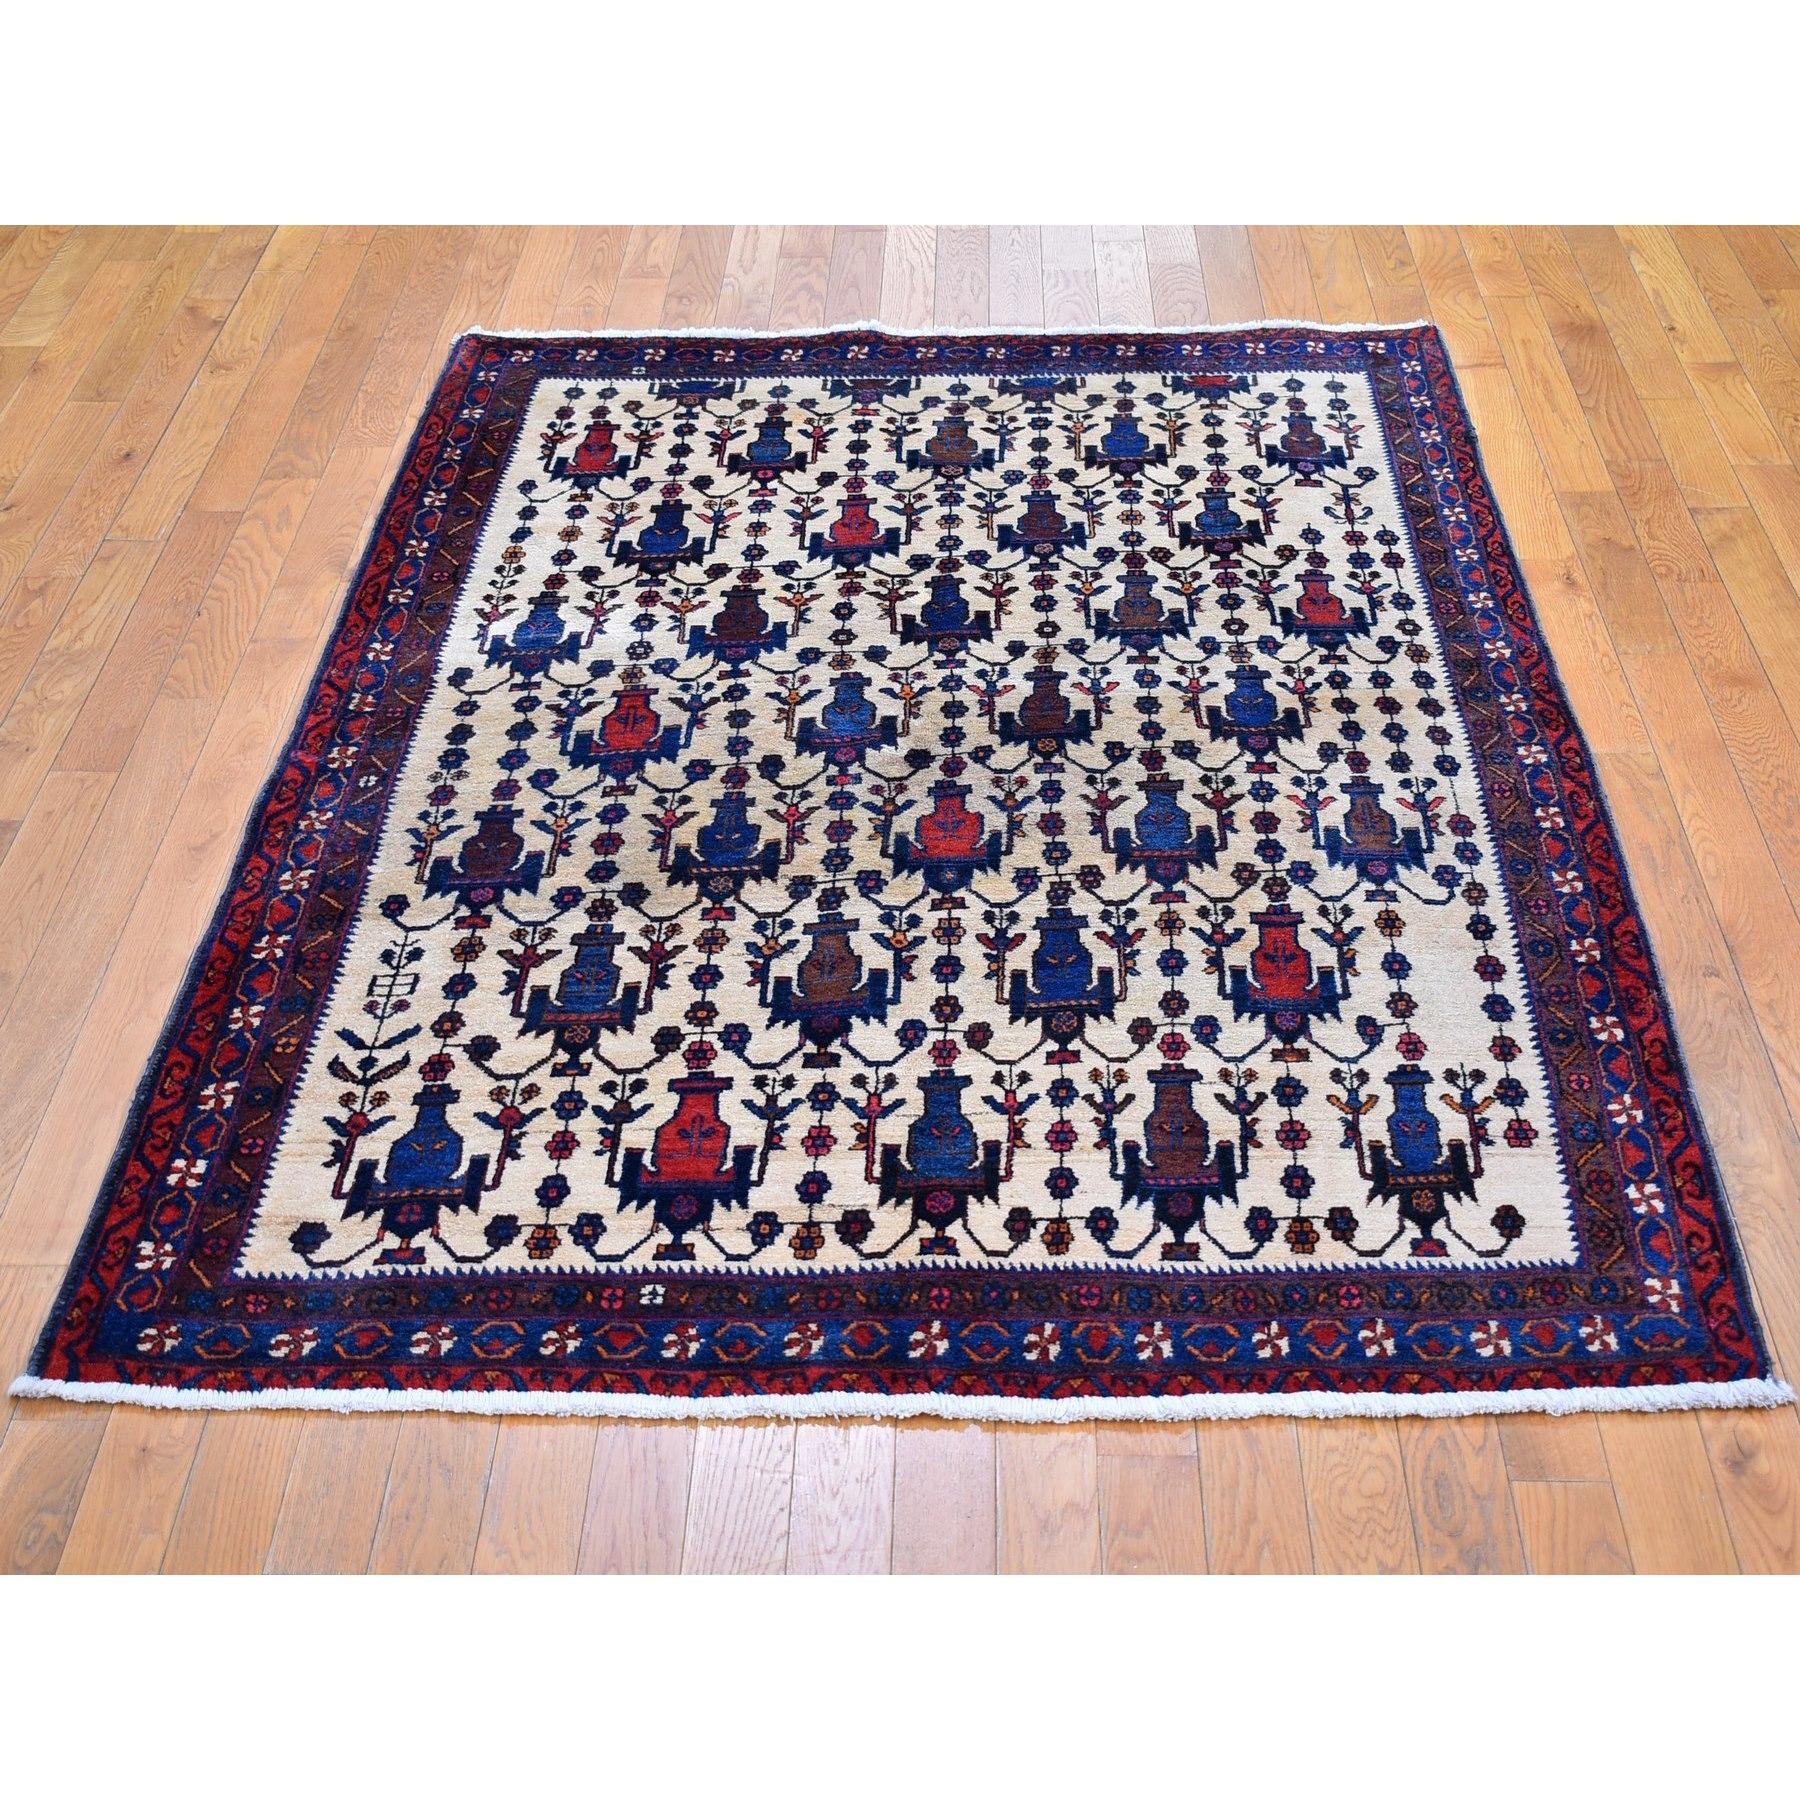 This fabulous hand-knotted carpet has been created and designed for extra strength and durability. This rug has been handcrafted for weeks in the traditional method that is used to make
Exact rug size in feet and inches: 4'10